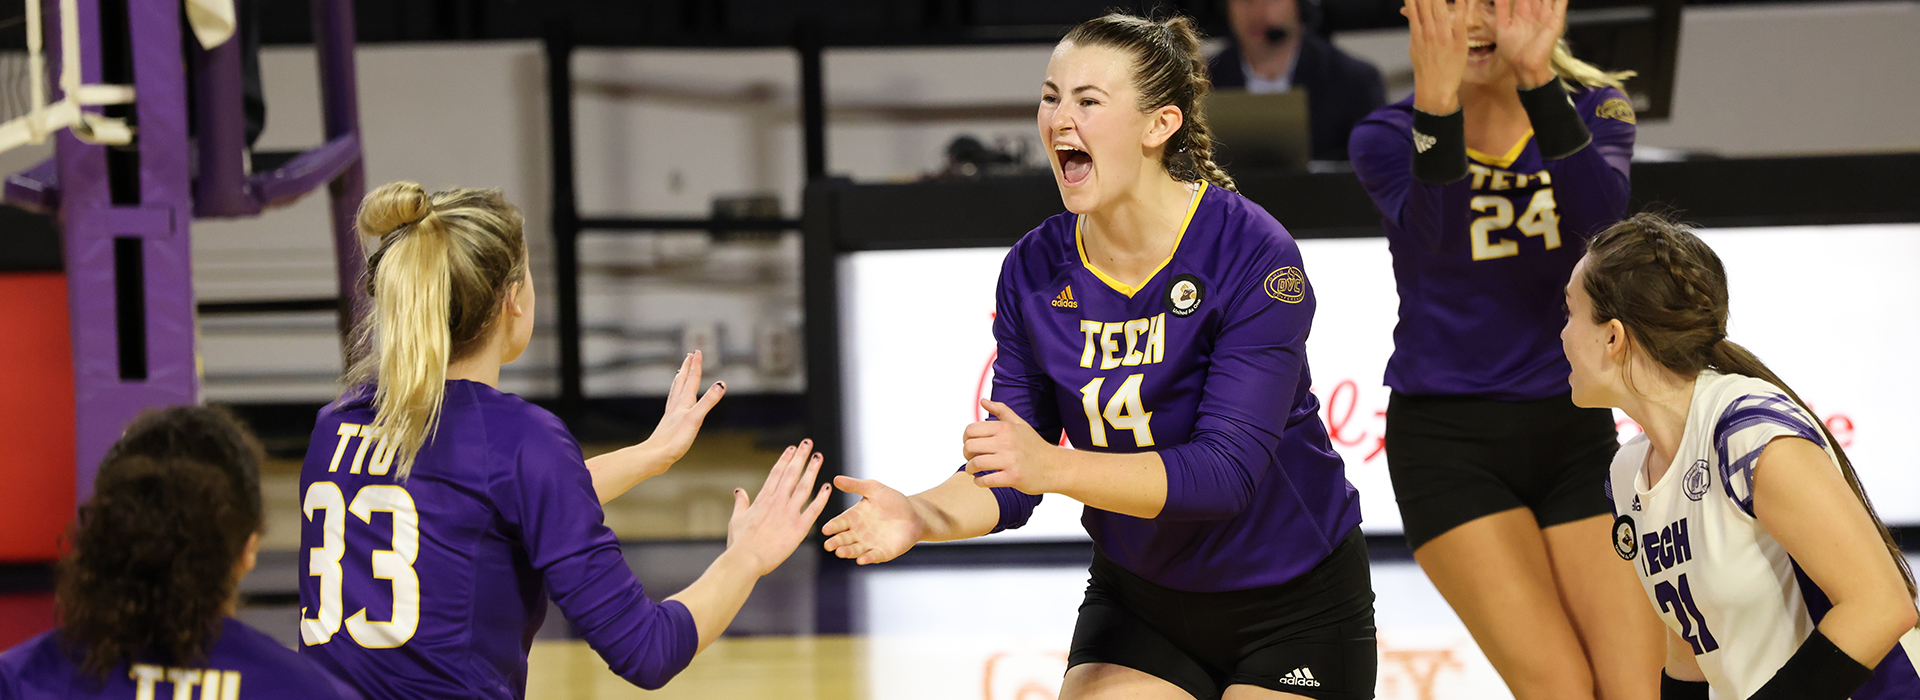 Blistering offense leads Golden Eagles to 3-0 sweep over Redhawks